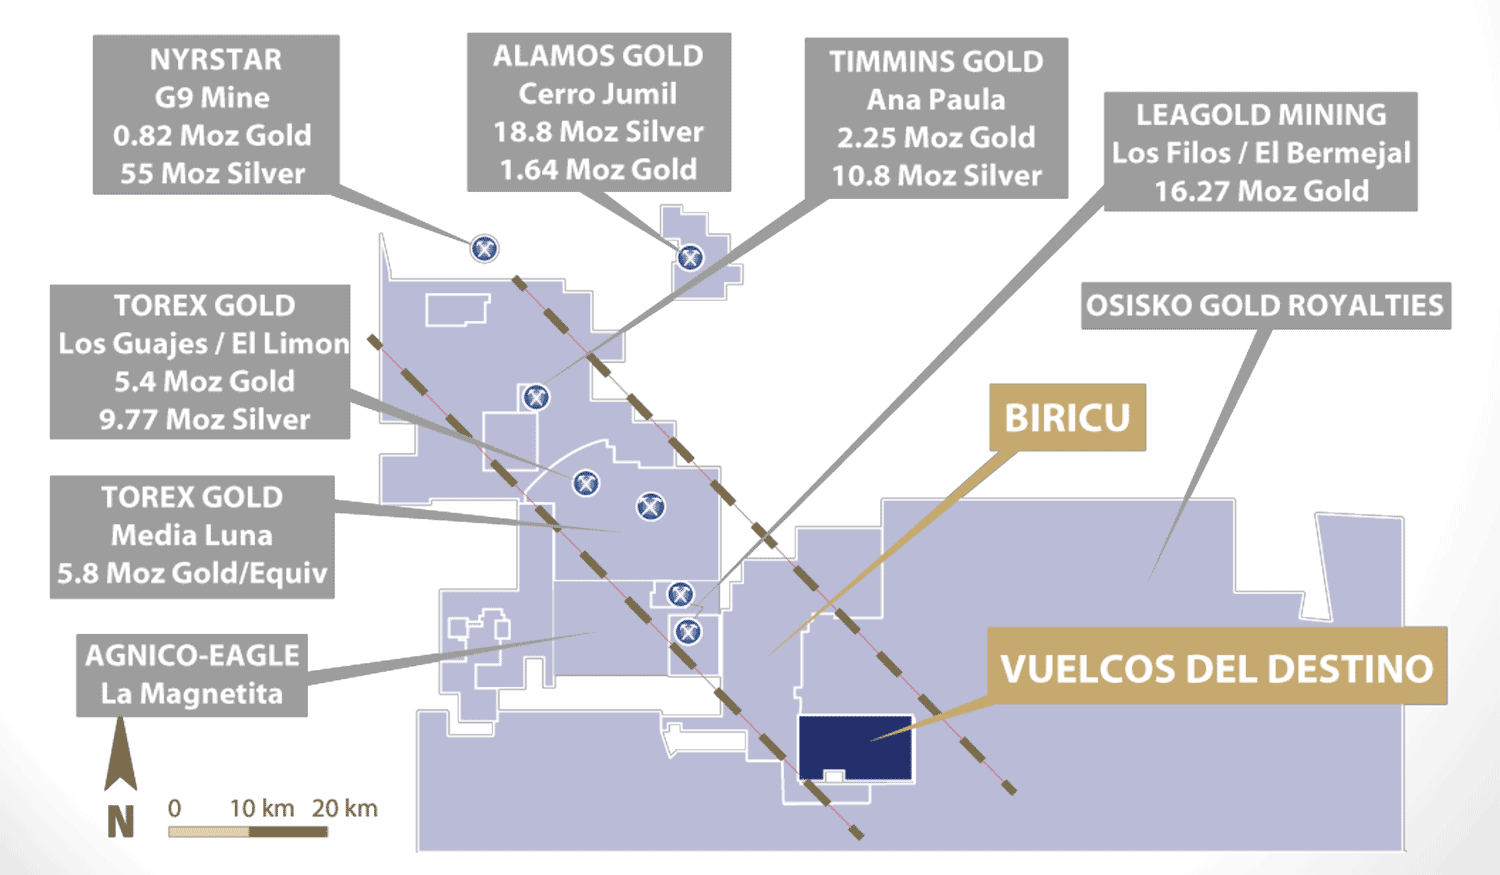 Guerrero Gold Belt: Over 31 million ounces of gold discovered in the belt since the late 1990s